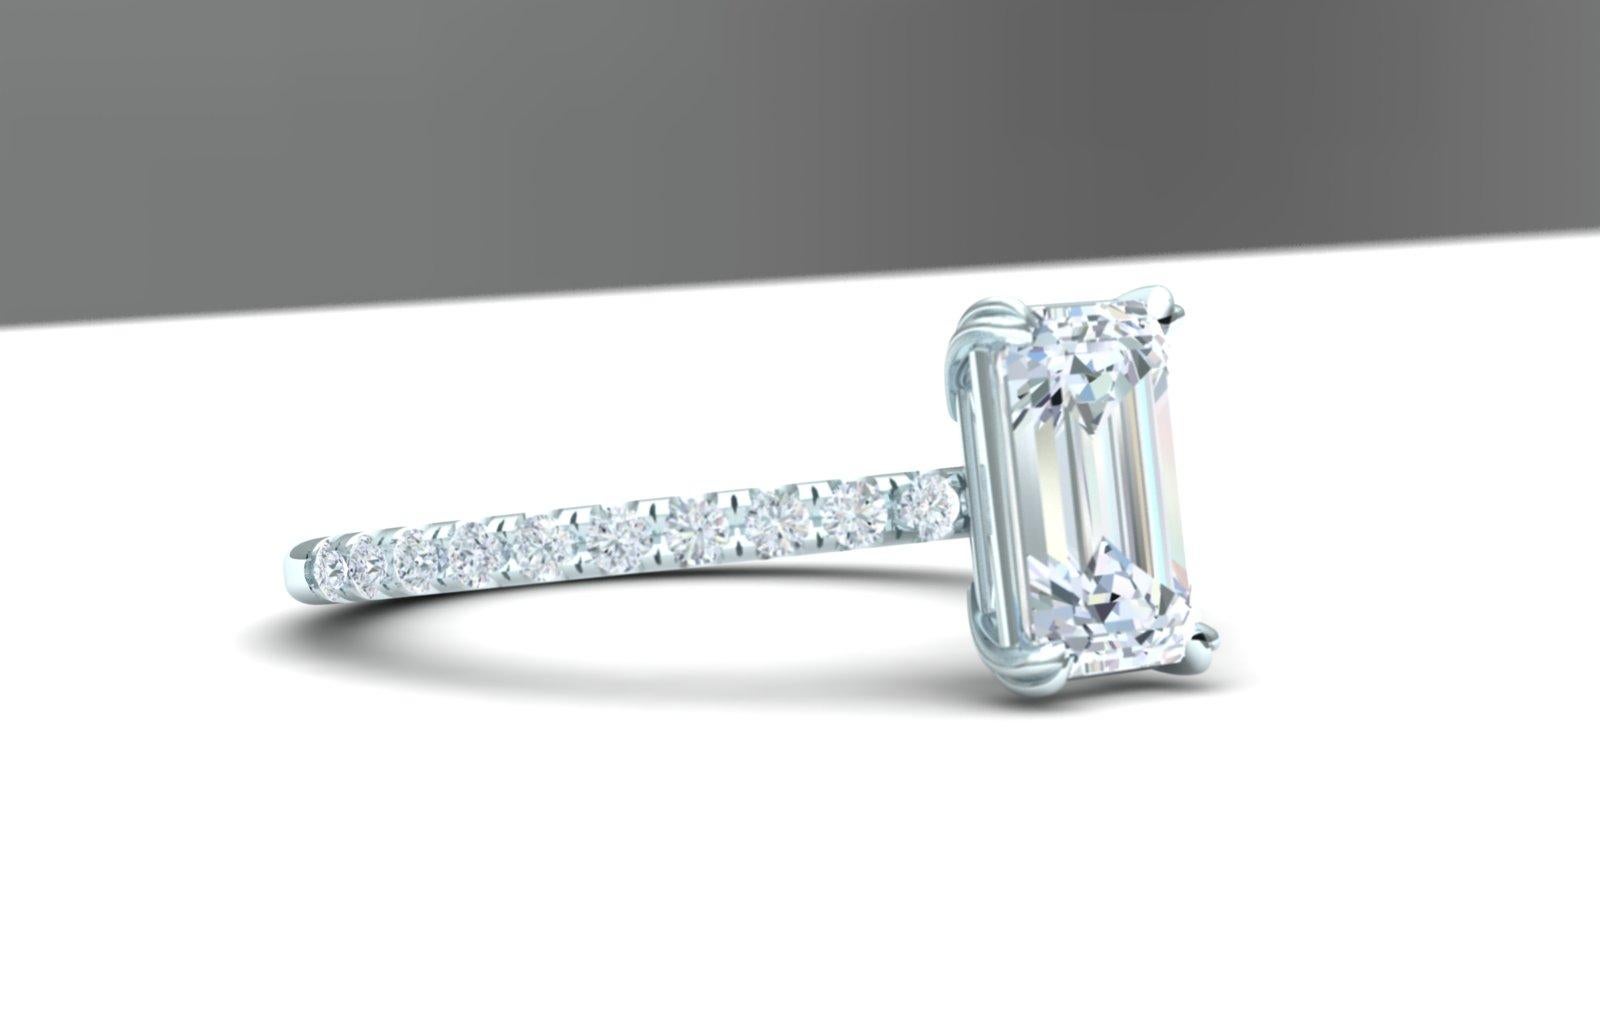 Here is a simple but stunning diamond ring that anyone would be excited to open.  The center stone is a emerald cut that is GIA certified and weighs 1.5 carats and a color and clarity of H-VS2.  The center stone is set in a 18k white gold mounting